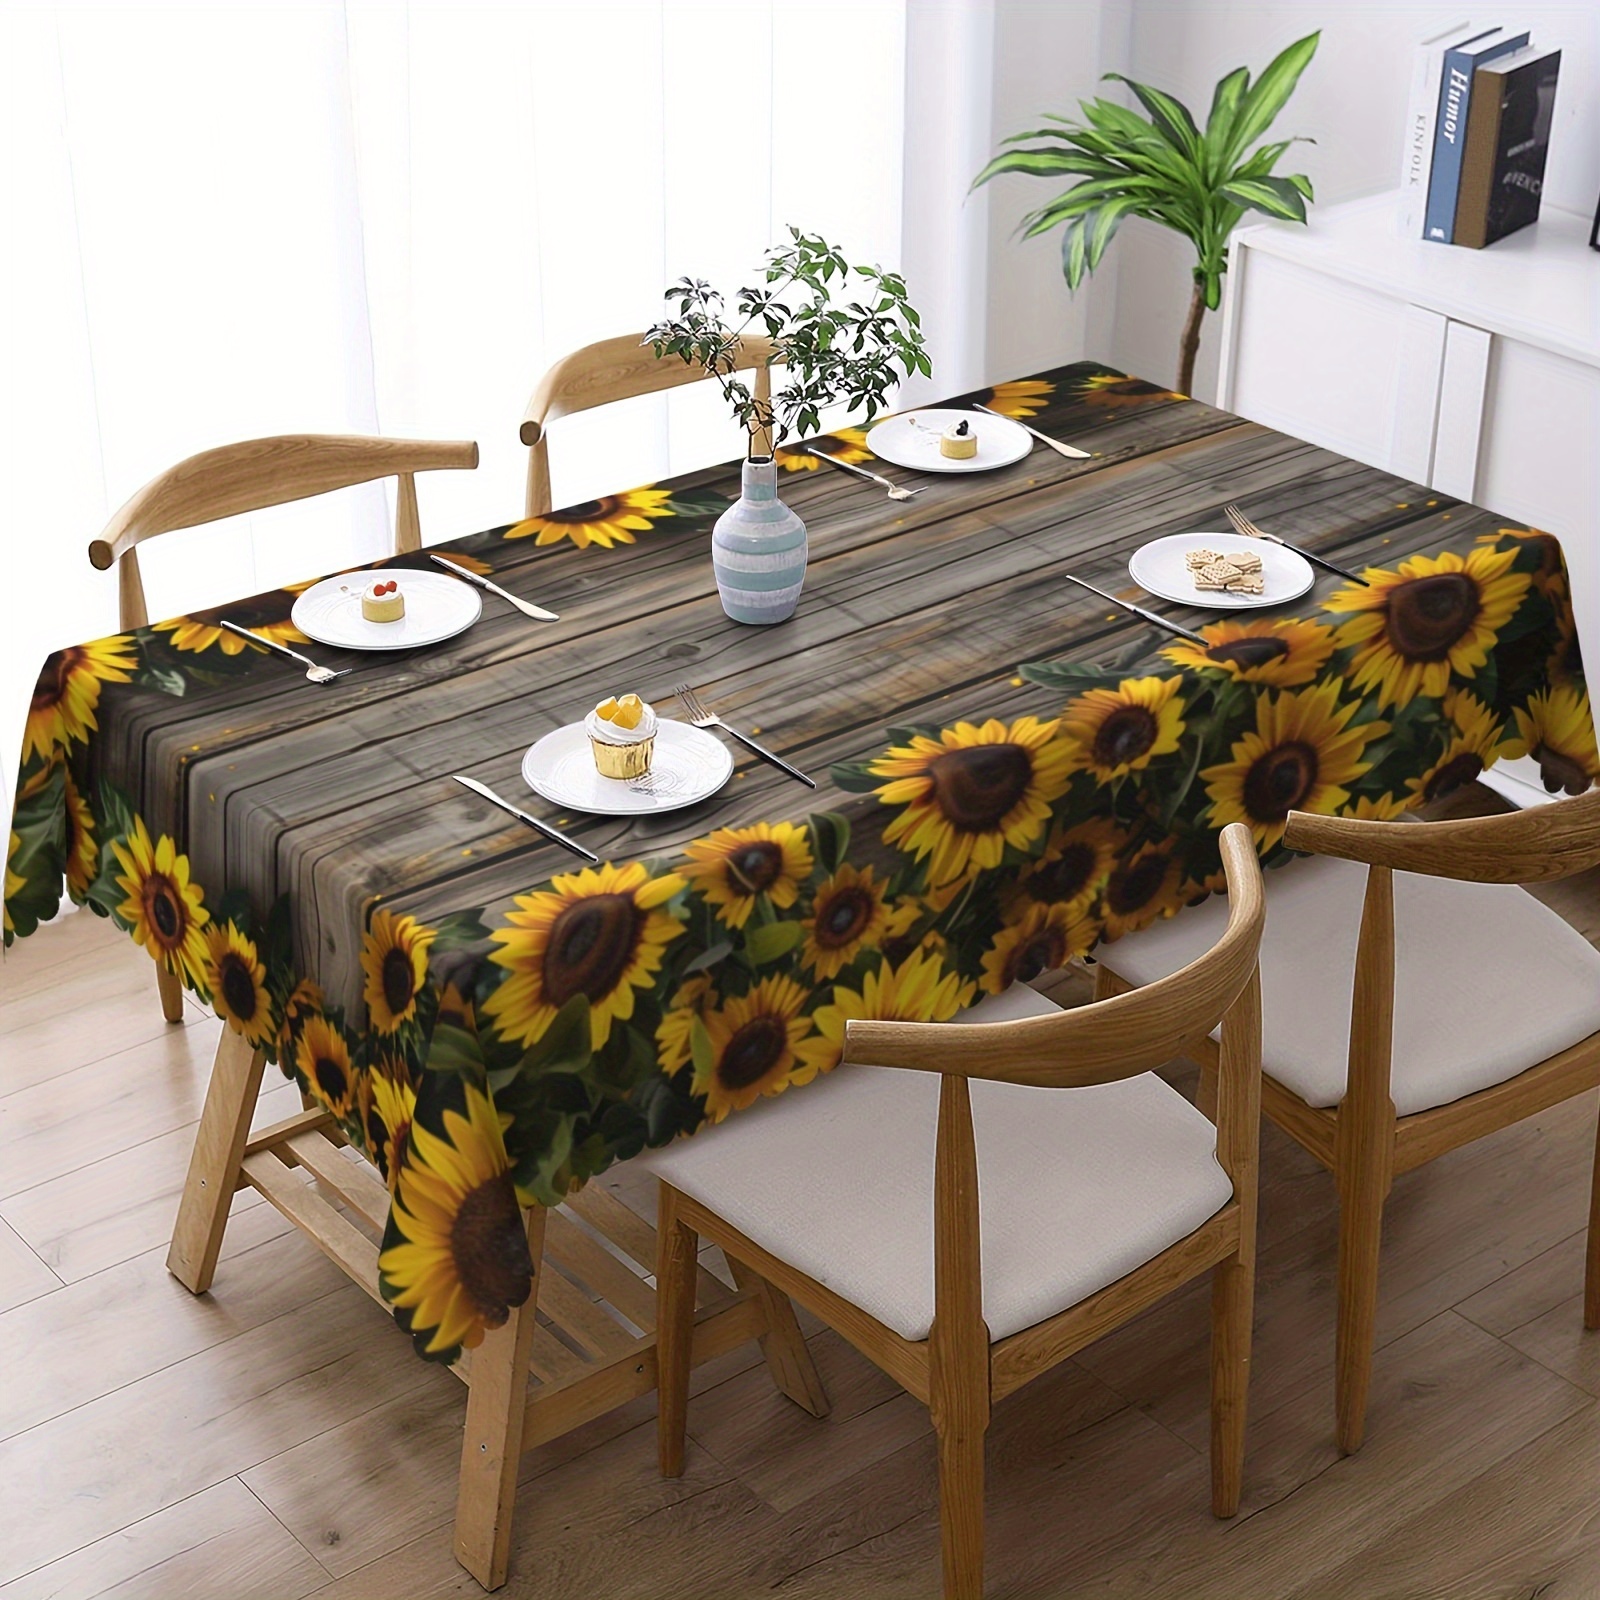 

1pc, Tablecloth, Sunflower Pattern Polyester Table Cloth With Embossed Edge Print, Waterproof, Stain Resistant, Wrinkle Resistant Table Cover, Ideal For Home Kitchen And Dining Room Decor,